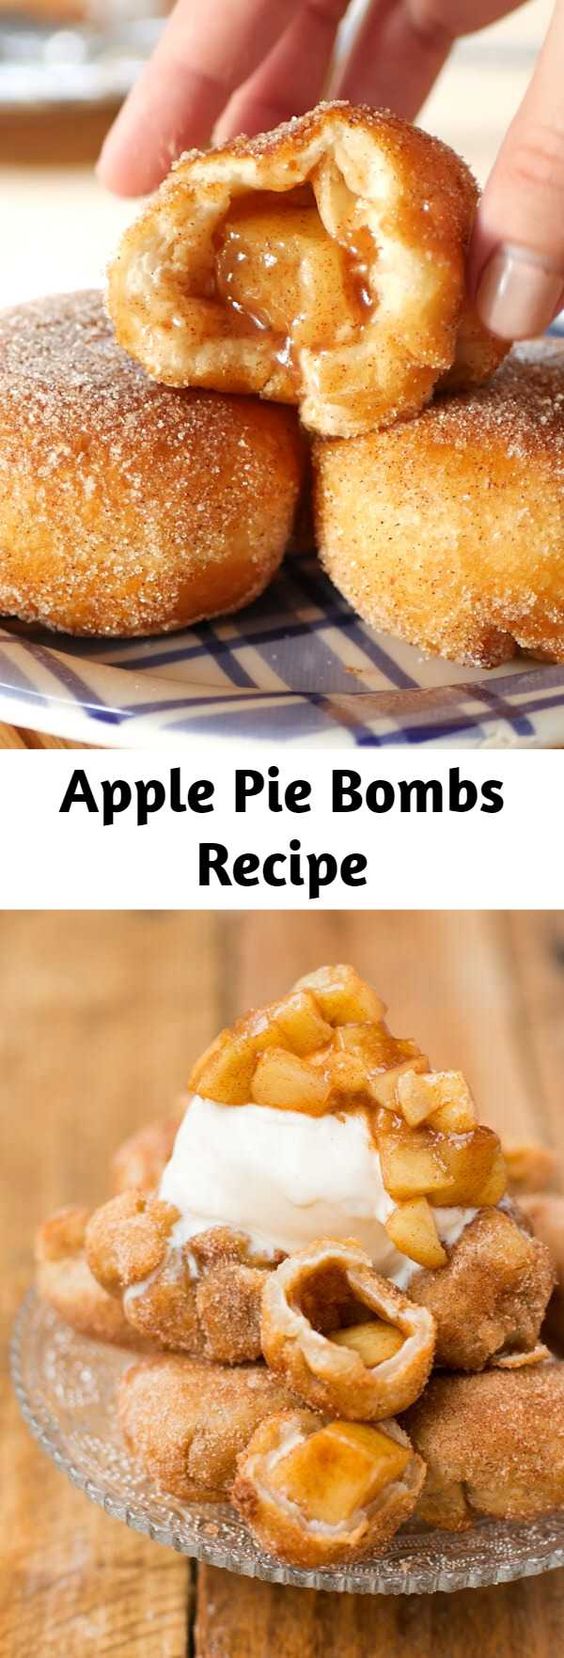 Apple Pie Bombs Recipe - It's not fall until you've made apple pie bombs a la mode with creamy vanilla ice cream and those glazed apples all over the tops. I love fall dessert recipes!